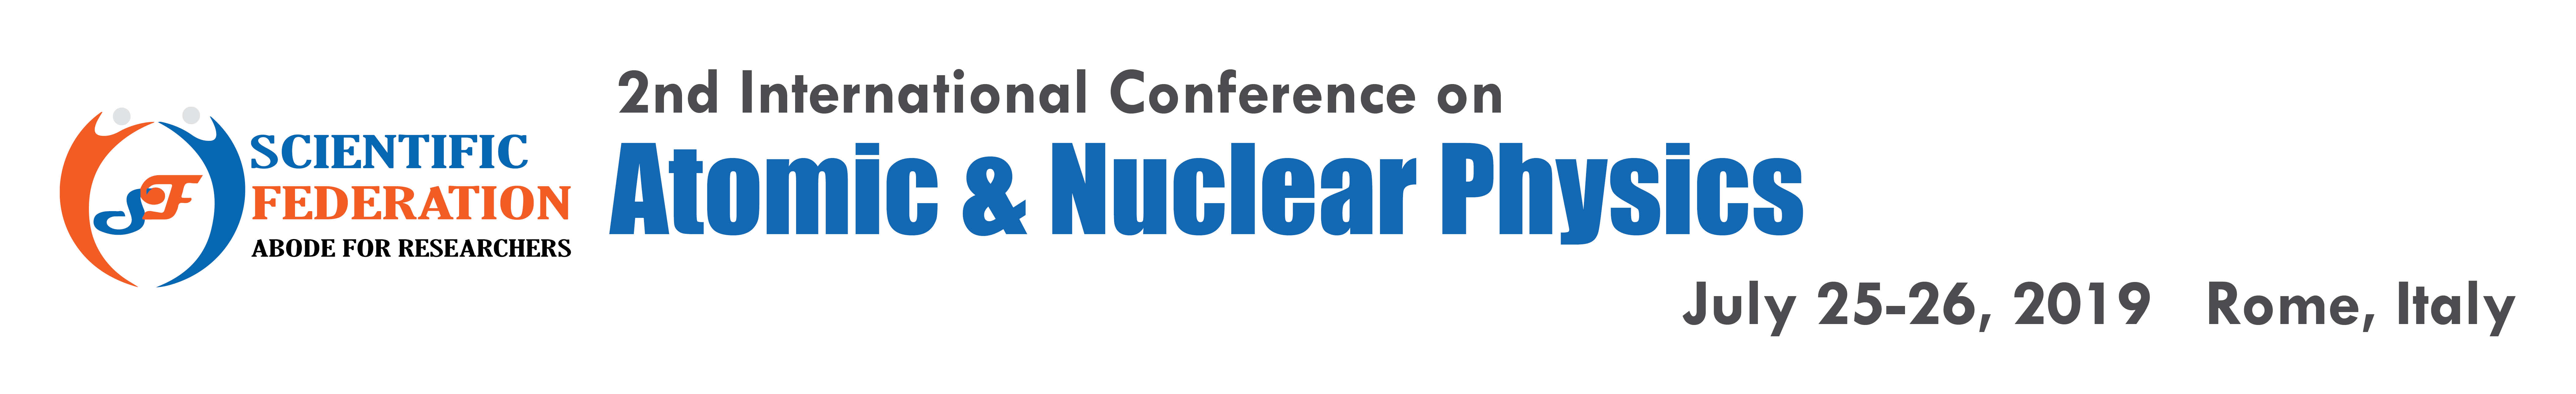 2ND INTERNATIONAL CONFERENCE ON  ATOMIC & NUCLEAR PHYSICS, Rome, Italy